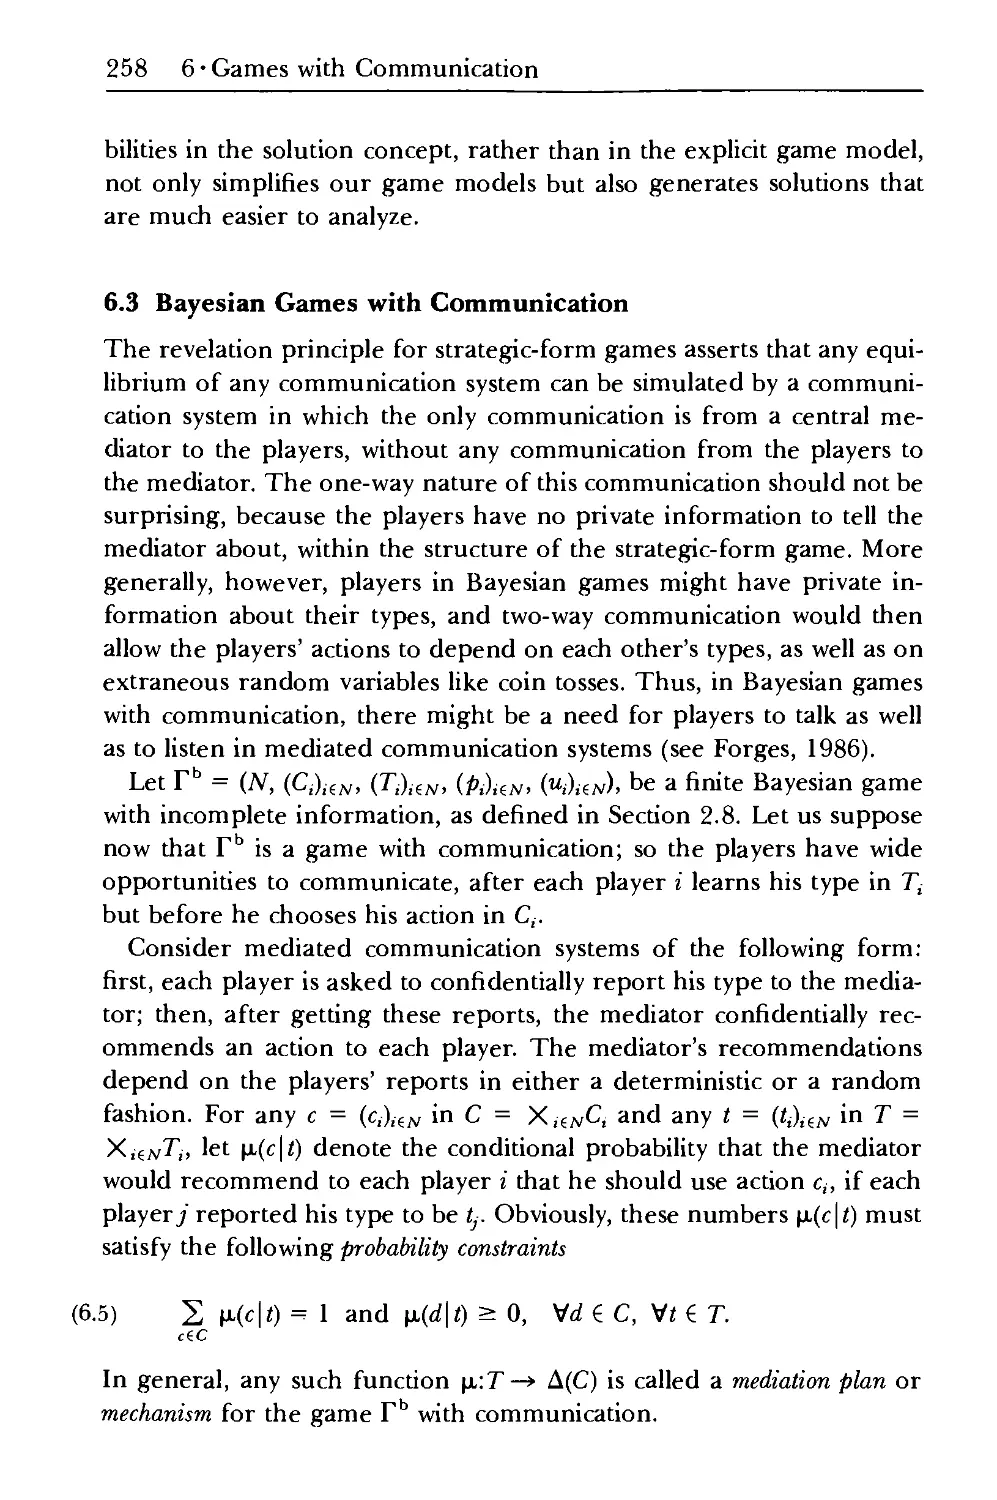 6.3 Bayesian Games with Communication